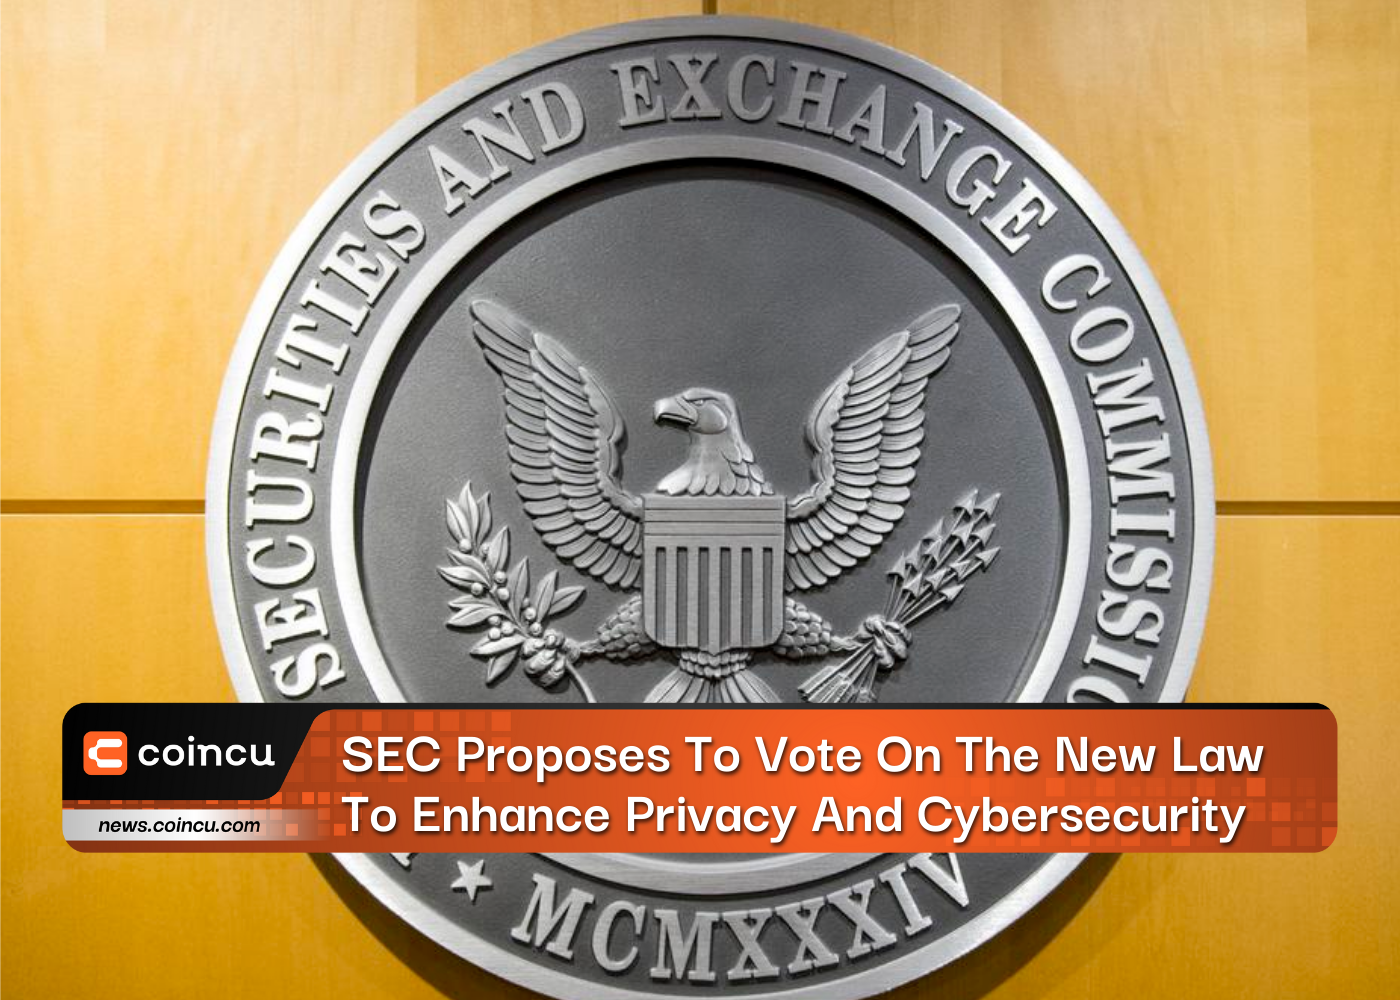 SEC Proposes To Vote On The New Law To Enhance Privacy And Cybersecurity